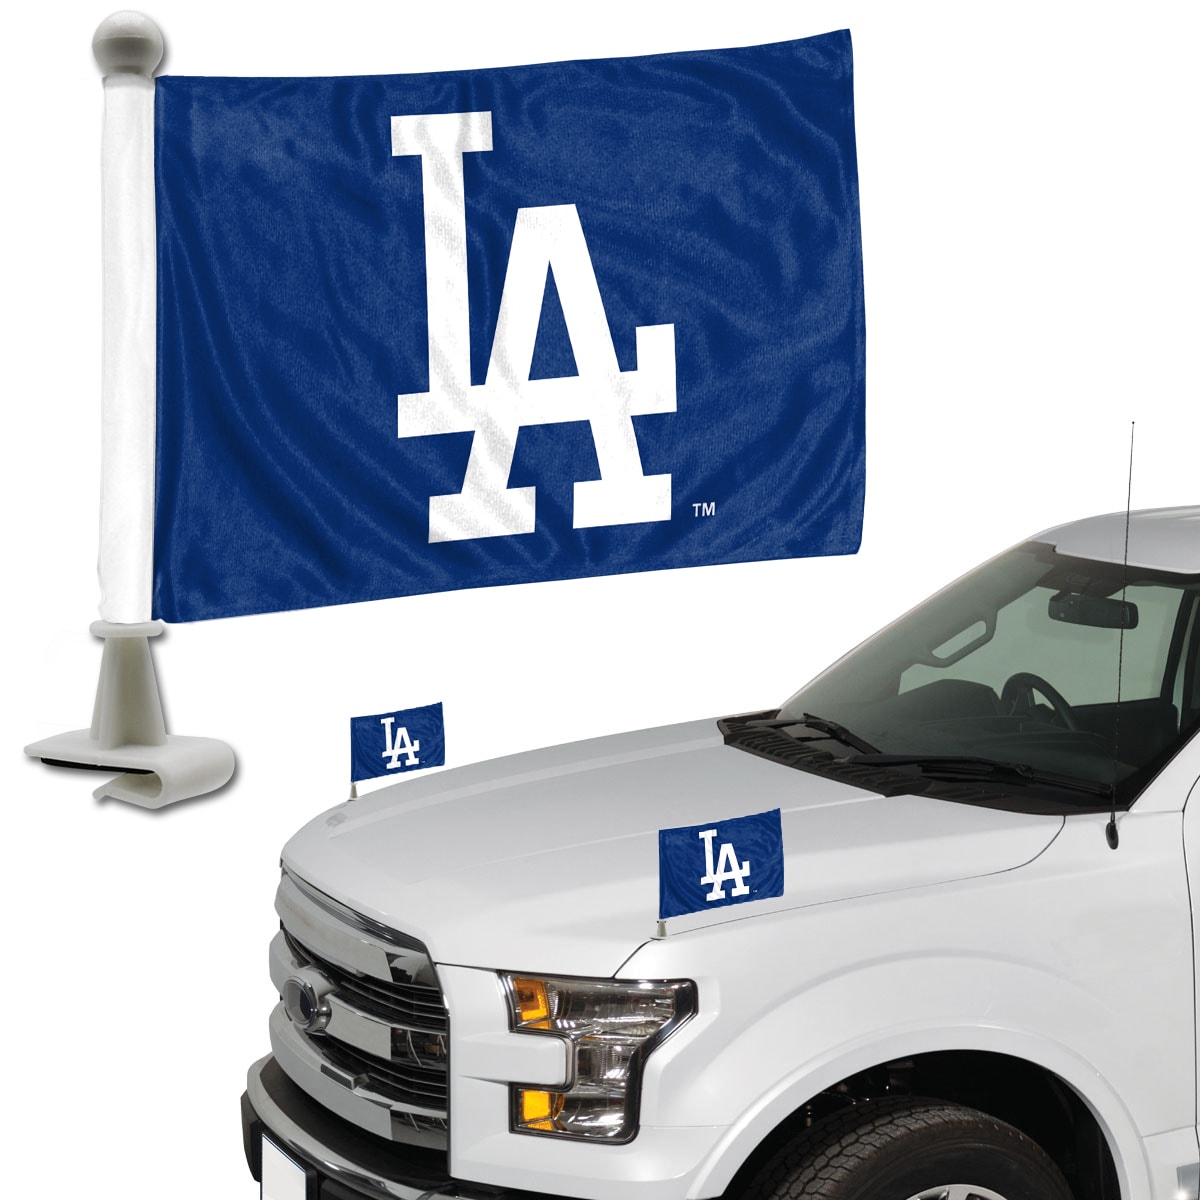 Amazoncom  WinCraft MLB Angels 01756215 Deluxe Flag 3 x 5  Sports   Outdoors